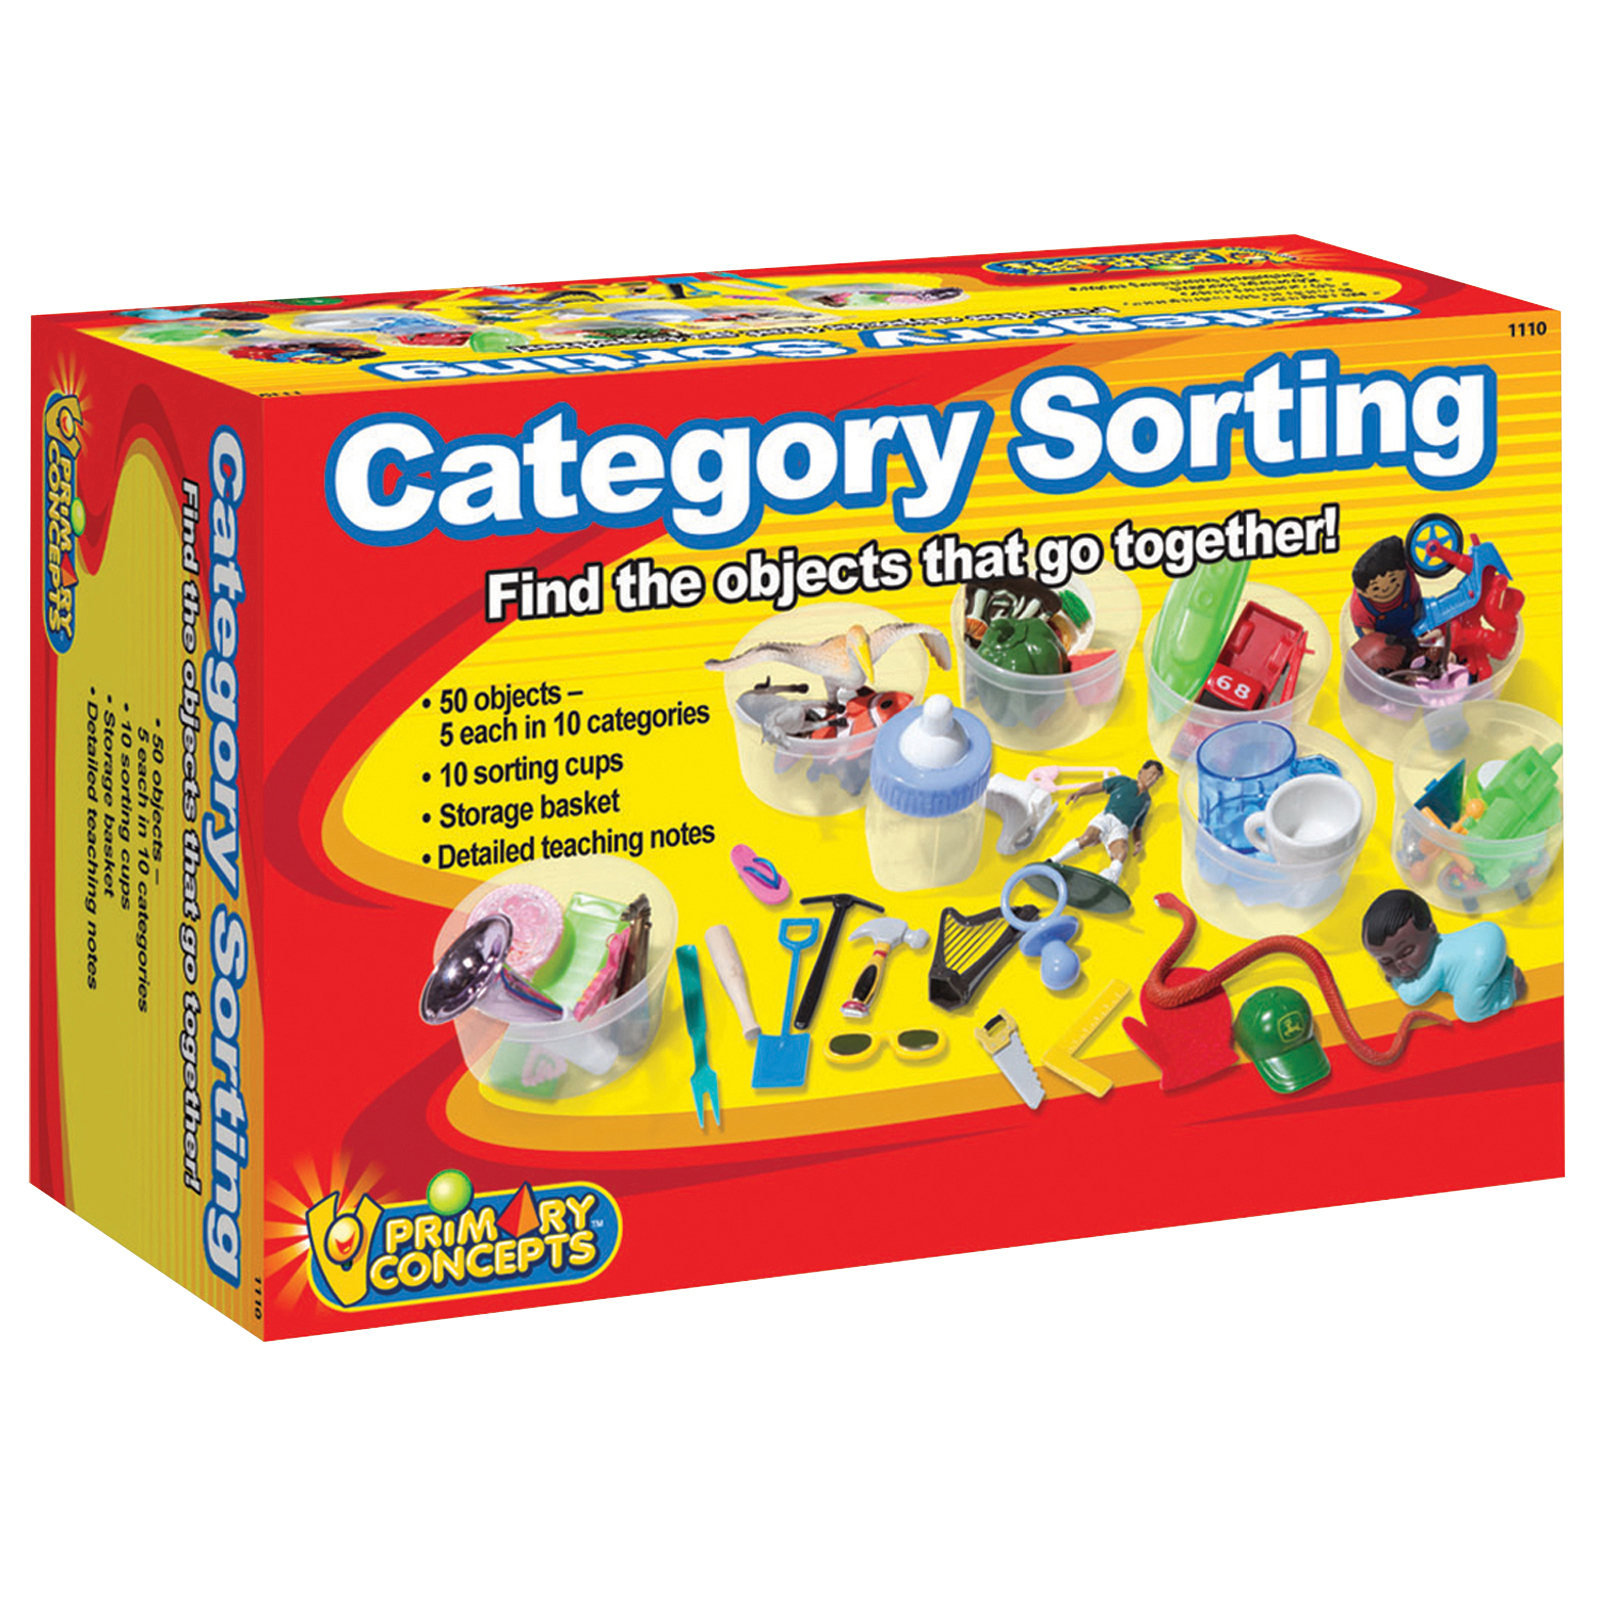 Primary Concepts Category Sorting Object Set